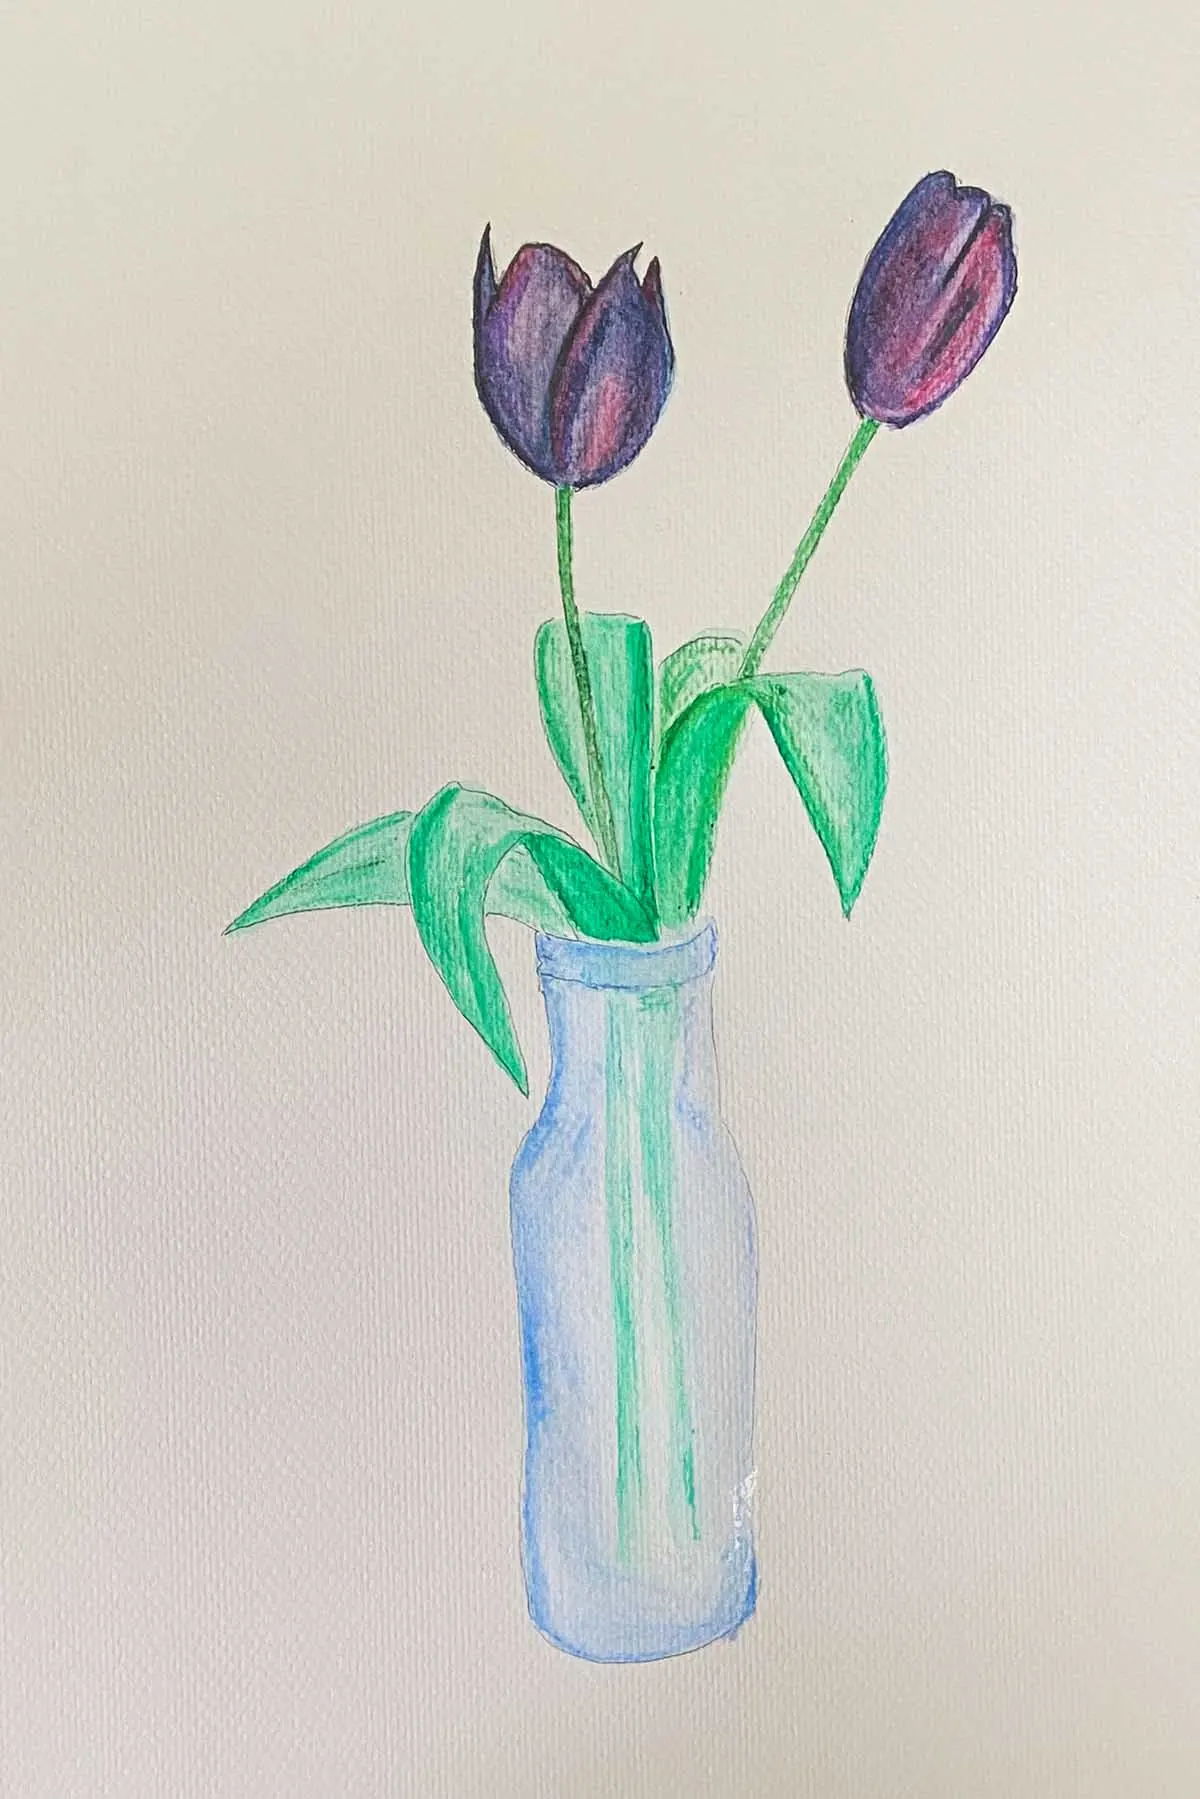 two purple painted tulips in a blue vase